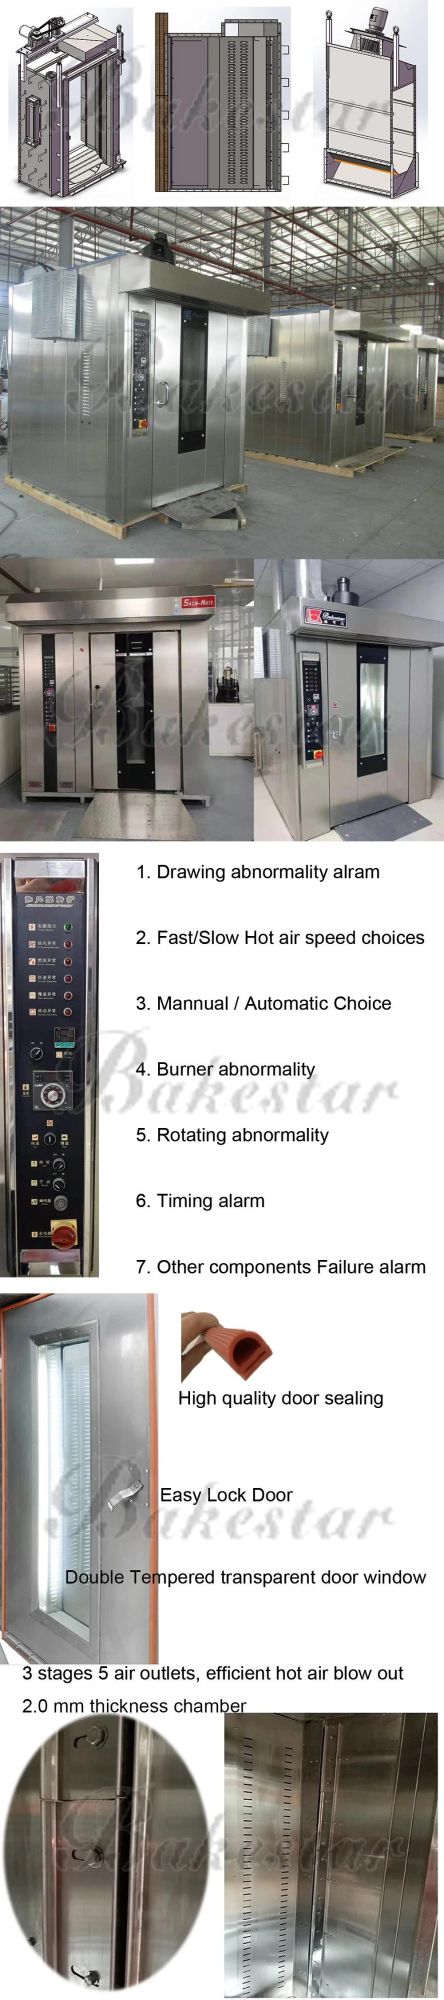 Baking Bread 16 Trays Diesel Rotary Rack Oven, Bake Food Factory Bakery Rotary Oven Equipment Set Mini Diesel Rotary Bakery Oven